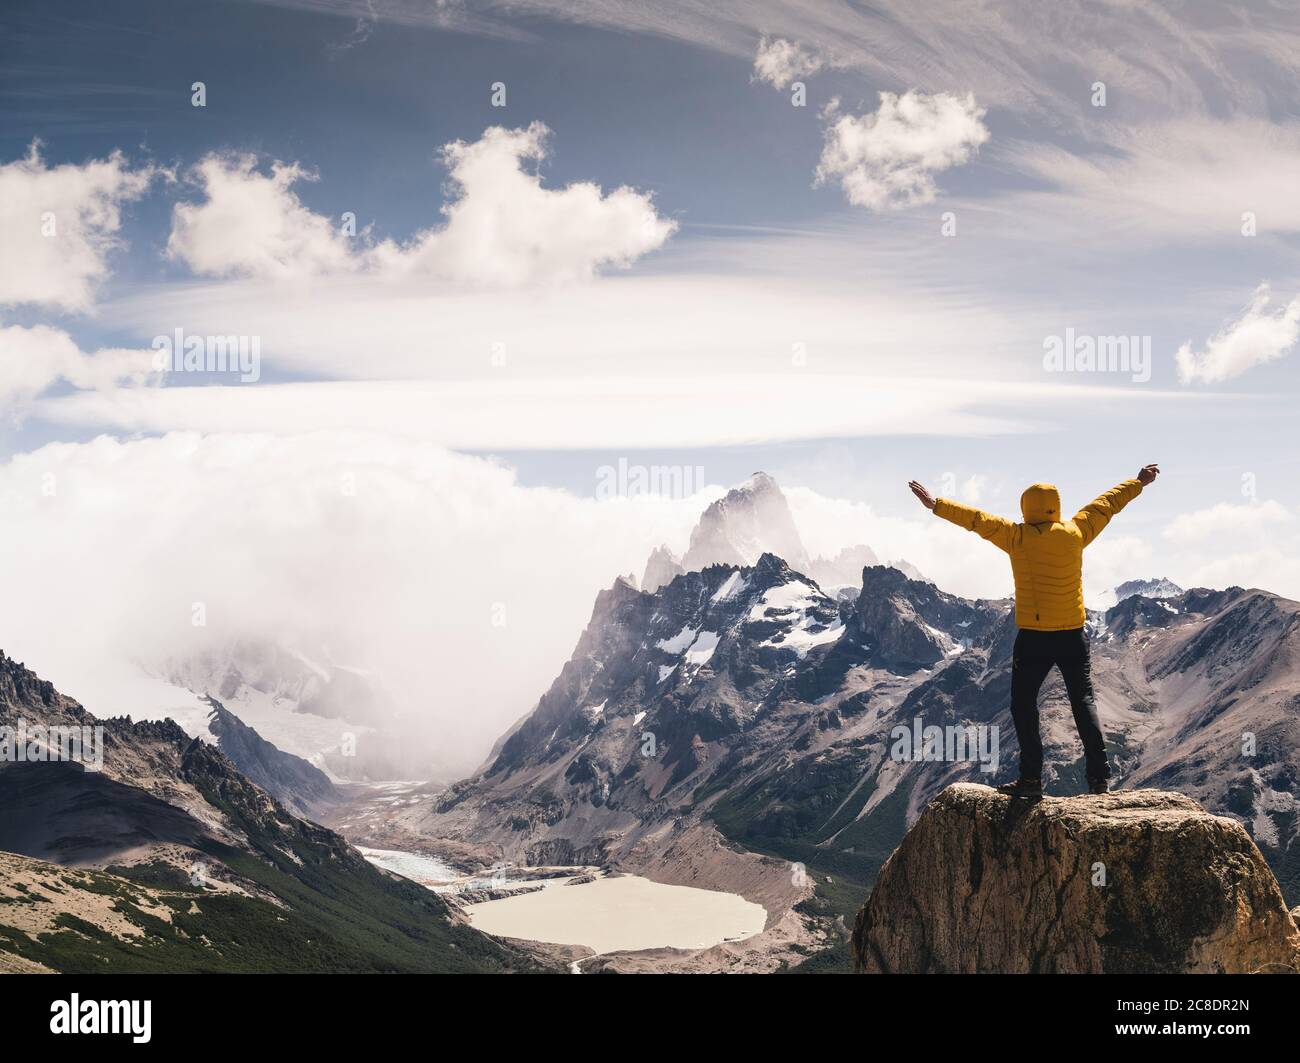 Man with arms outstretched looking at snowcapped mountain against cloudy sky, Patagonia, Argentina Stock Photo